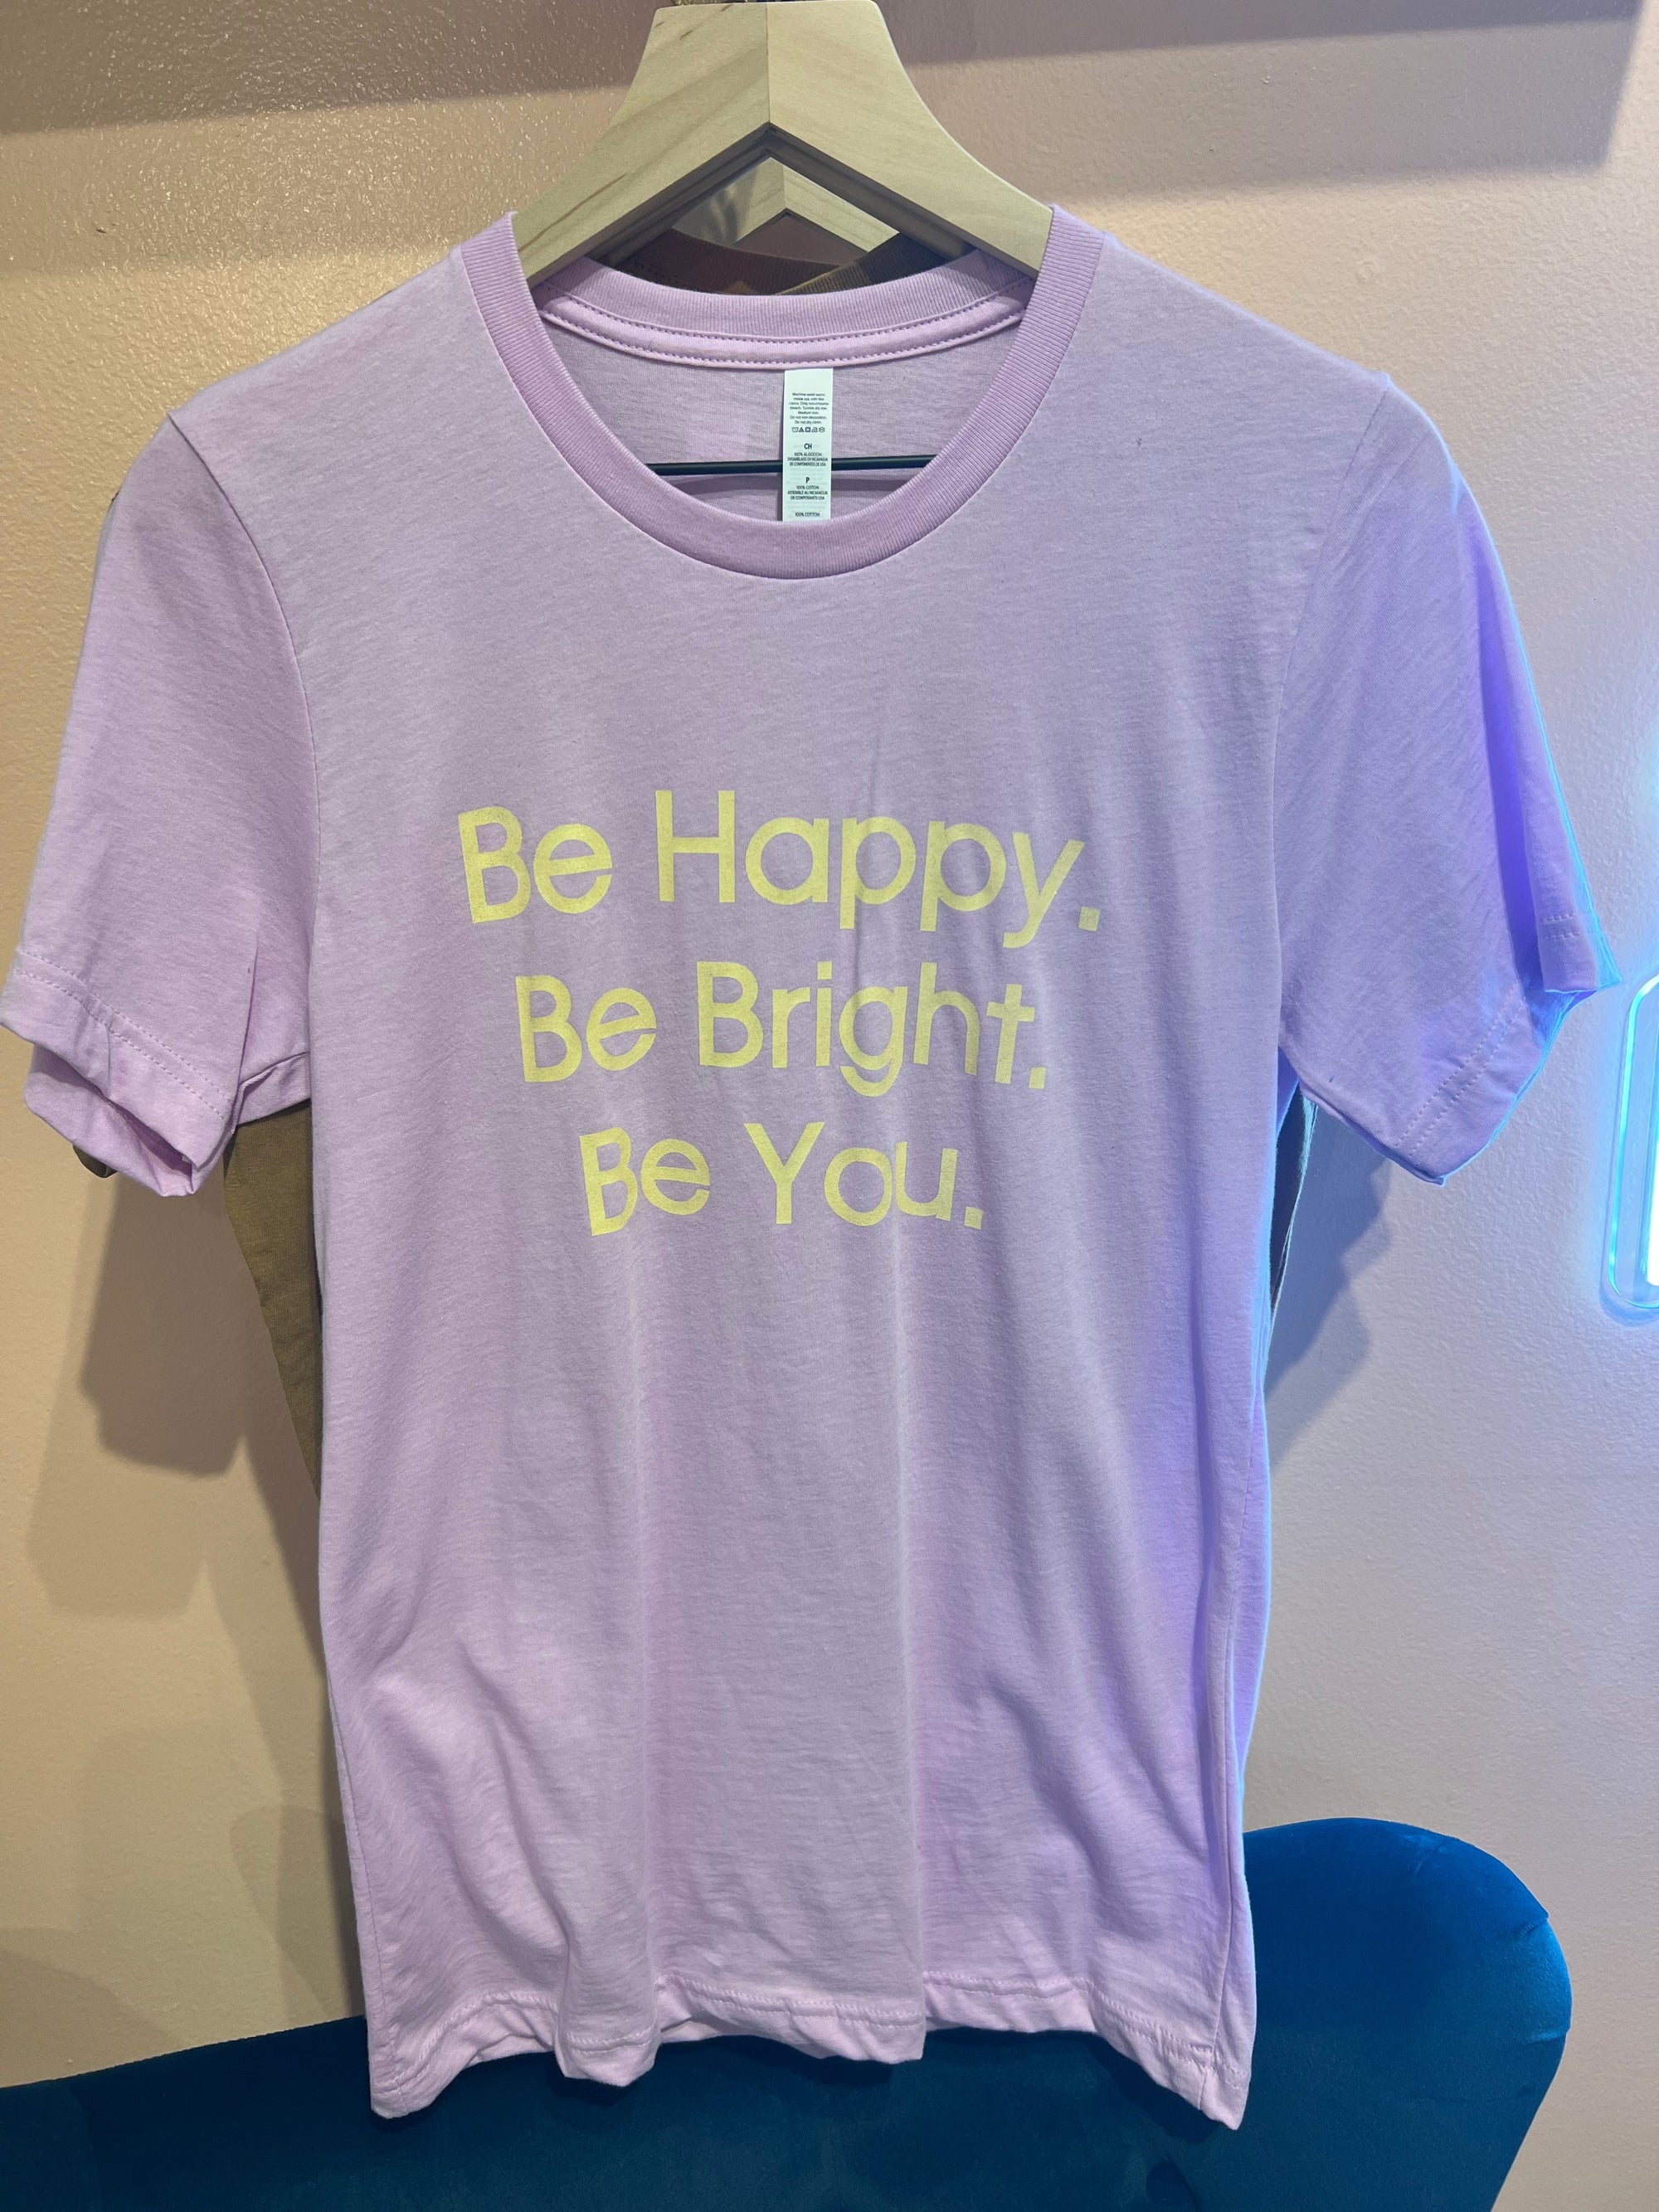 Be happy be bright be you tee Bella canvas 3001 